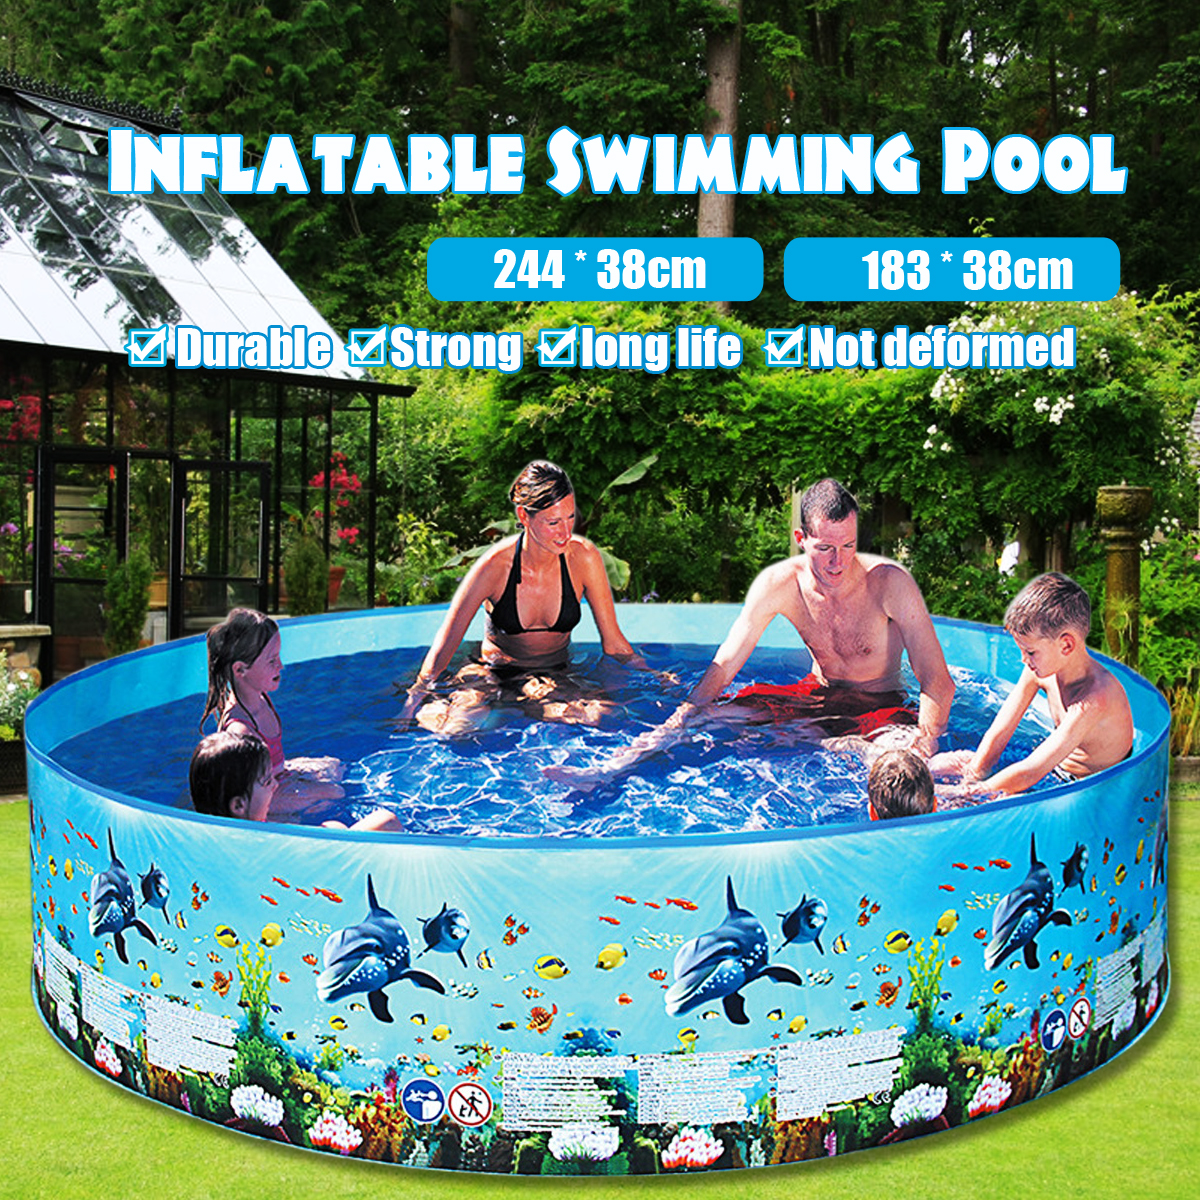 183244x38cm-No-Need-Inflatable-Swimming-Pool-Summer-Holiday-Children-Paddling-Pools-Beach-Family-Gam-1675411-1